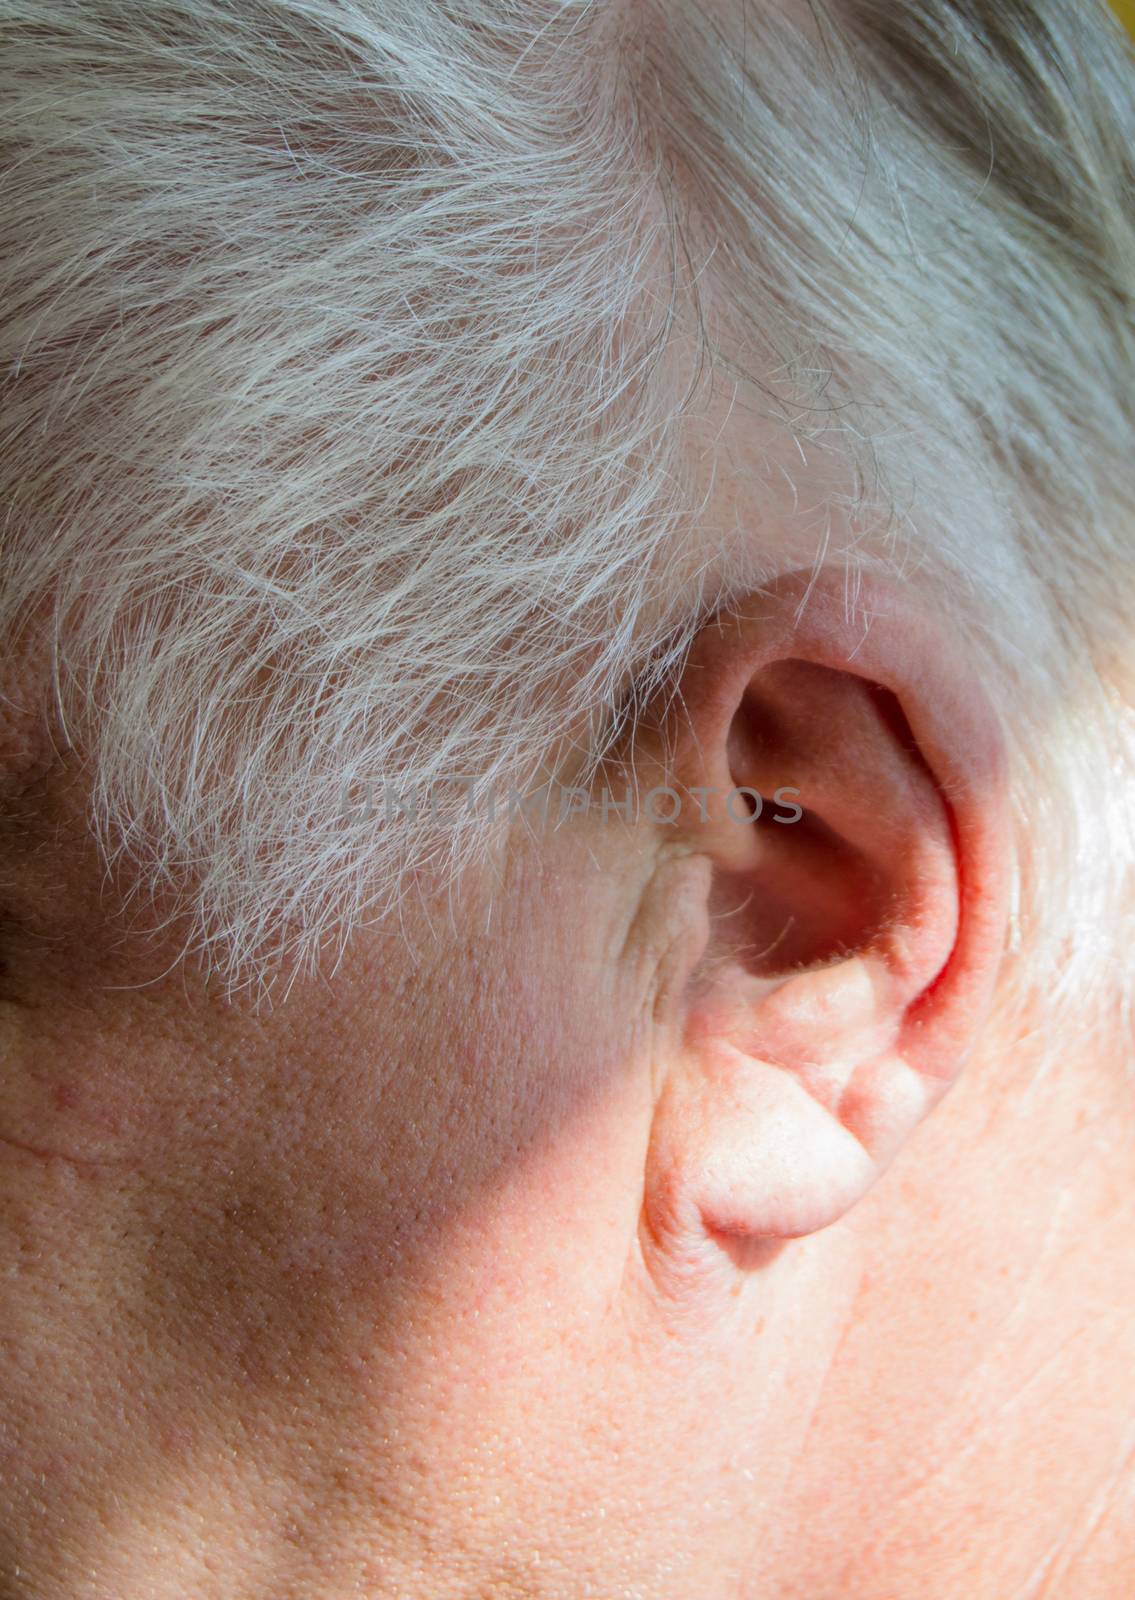 Left ear of a gray-haired elderly man with hearing loss, hearing problems, the concept of rehabilitation of old deaf people.